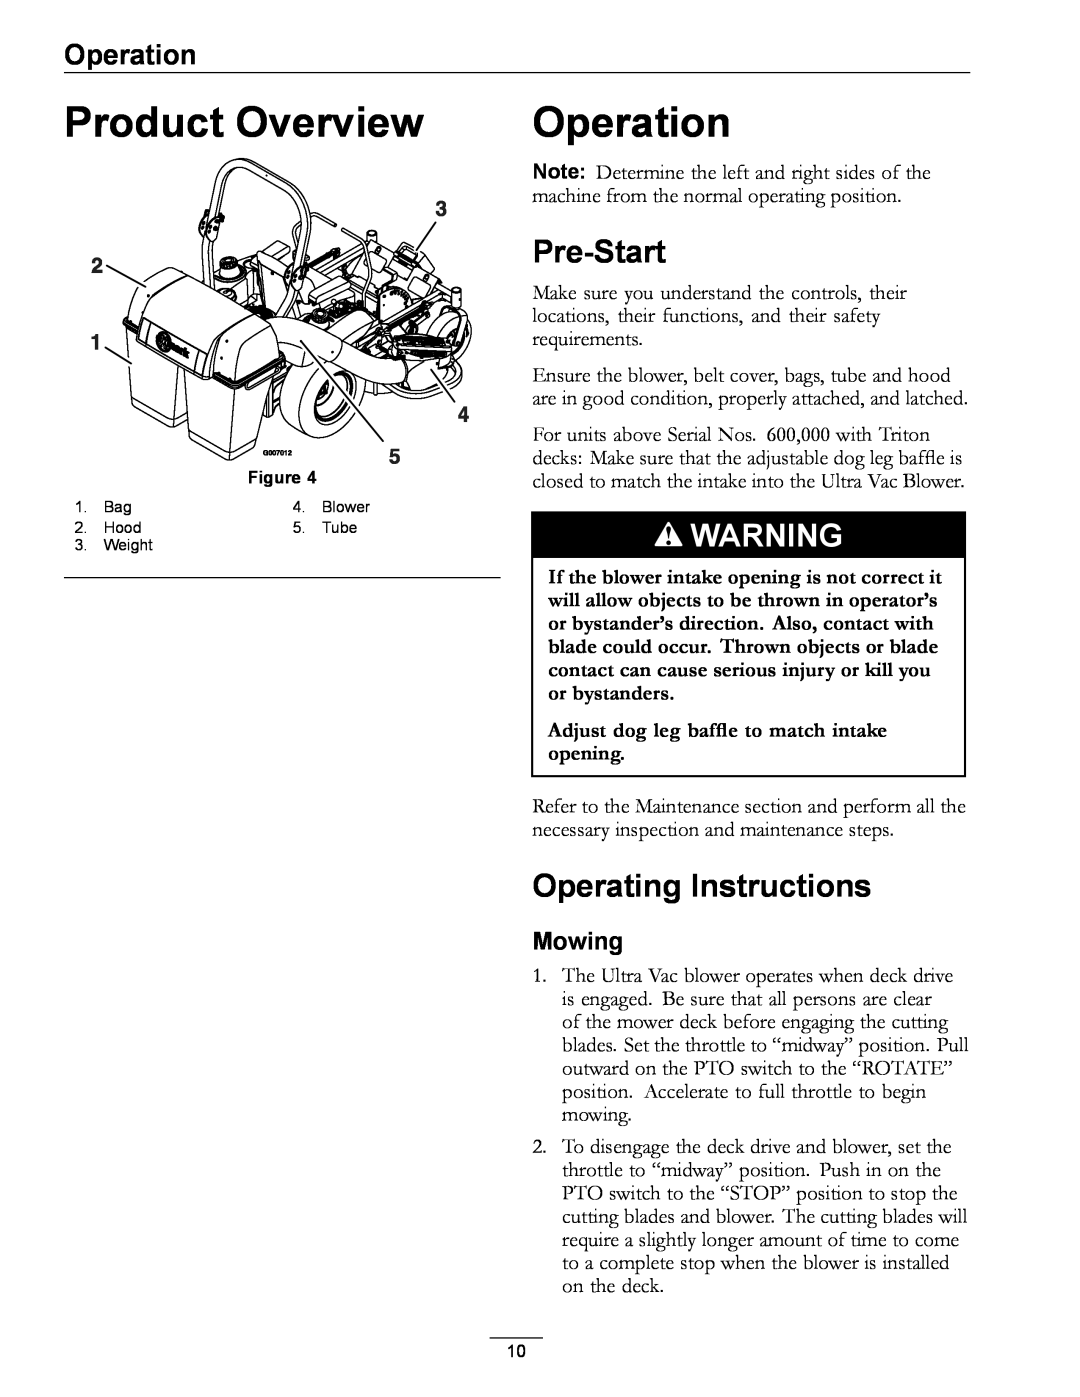 Exmark LAZER Z HP manual Product Overview, Operation, Pre-Start, Operating Instructions, Mowing 